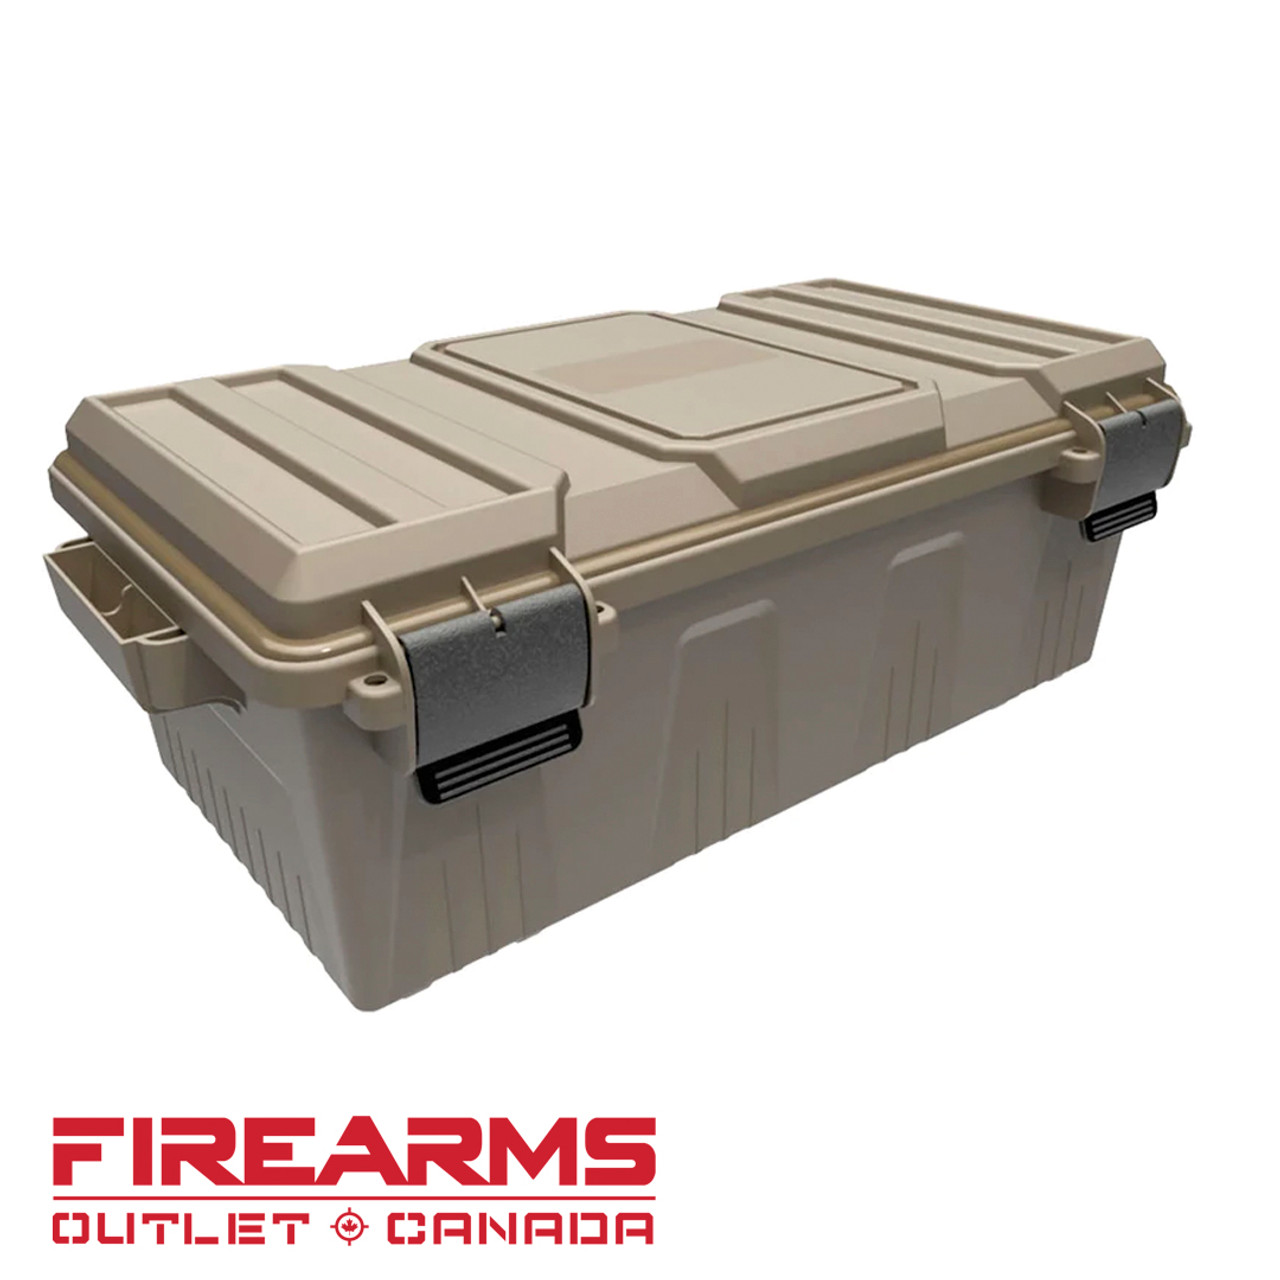 MTM Ammo Crate Divided Utility Box - Dark Earth, 6.6" [MTM-ACDC30]